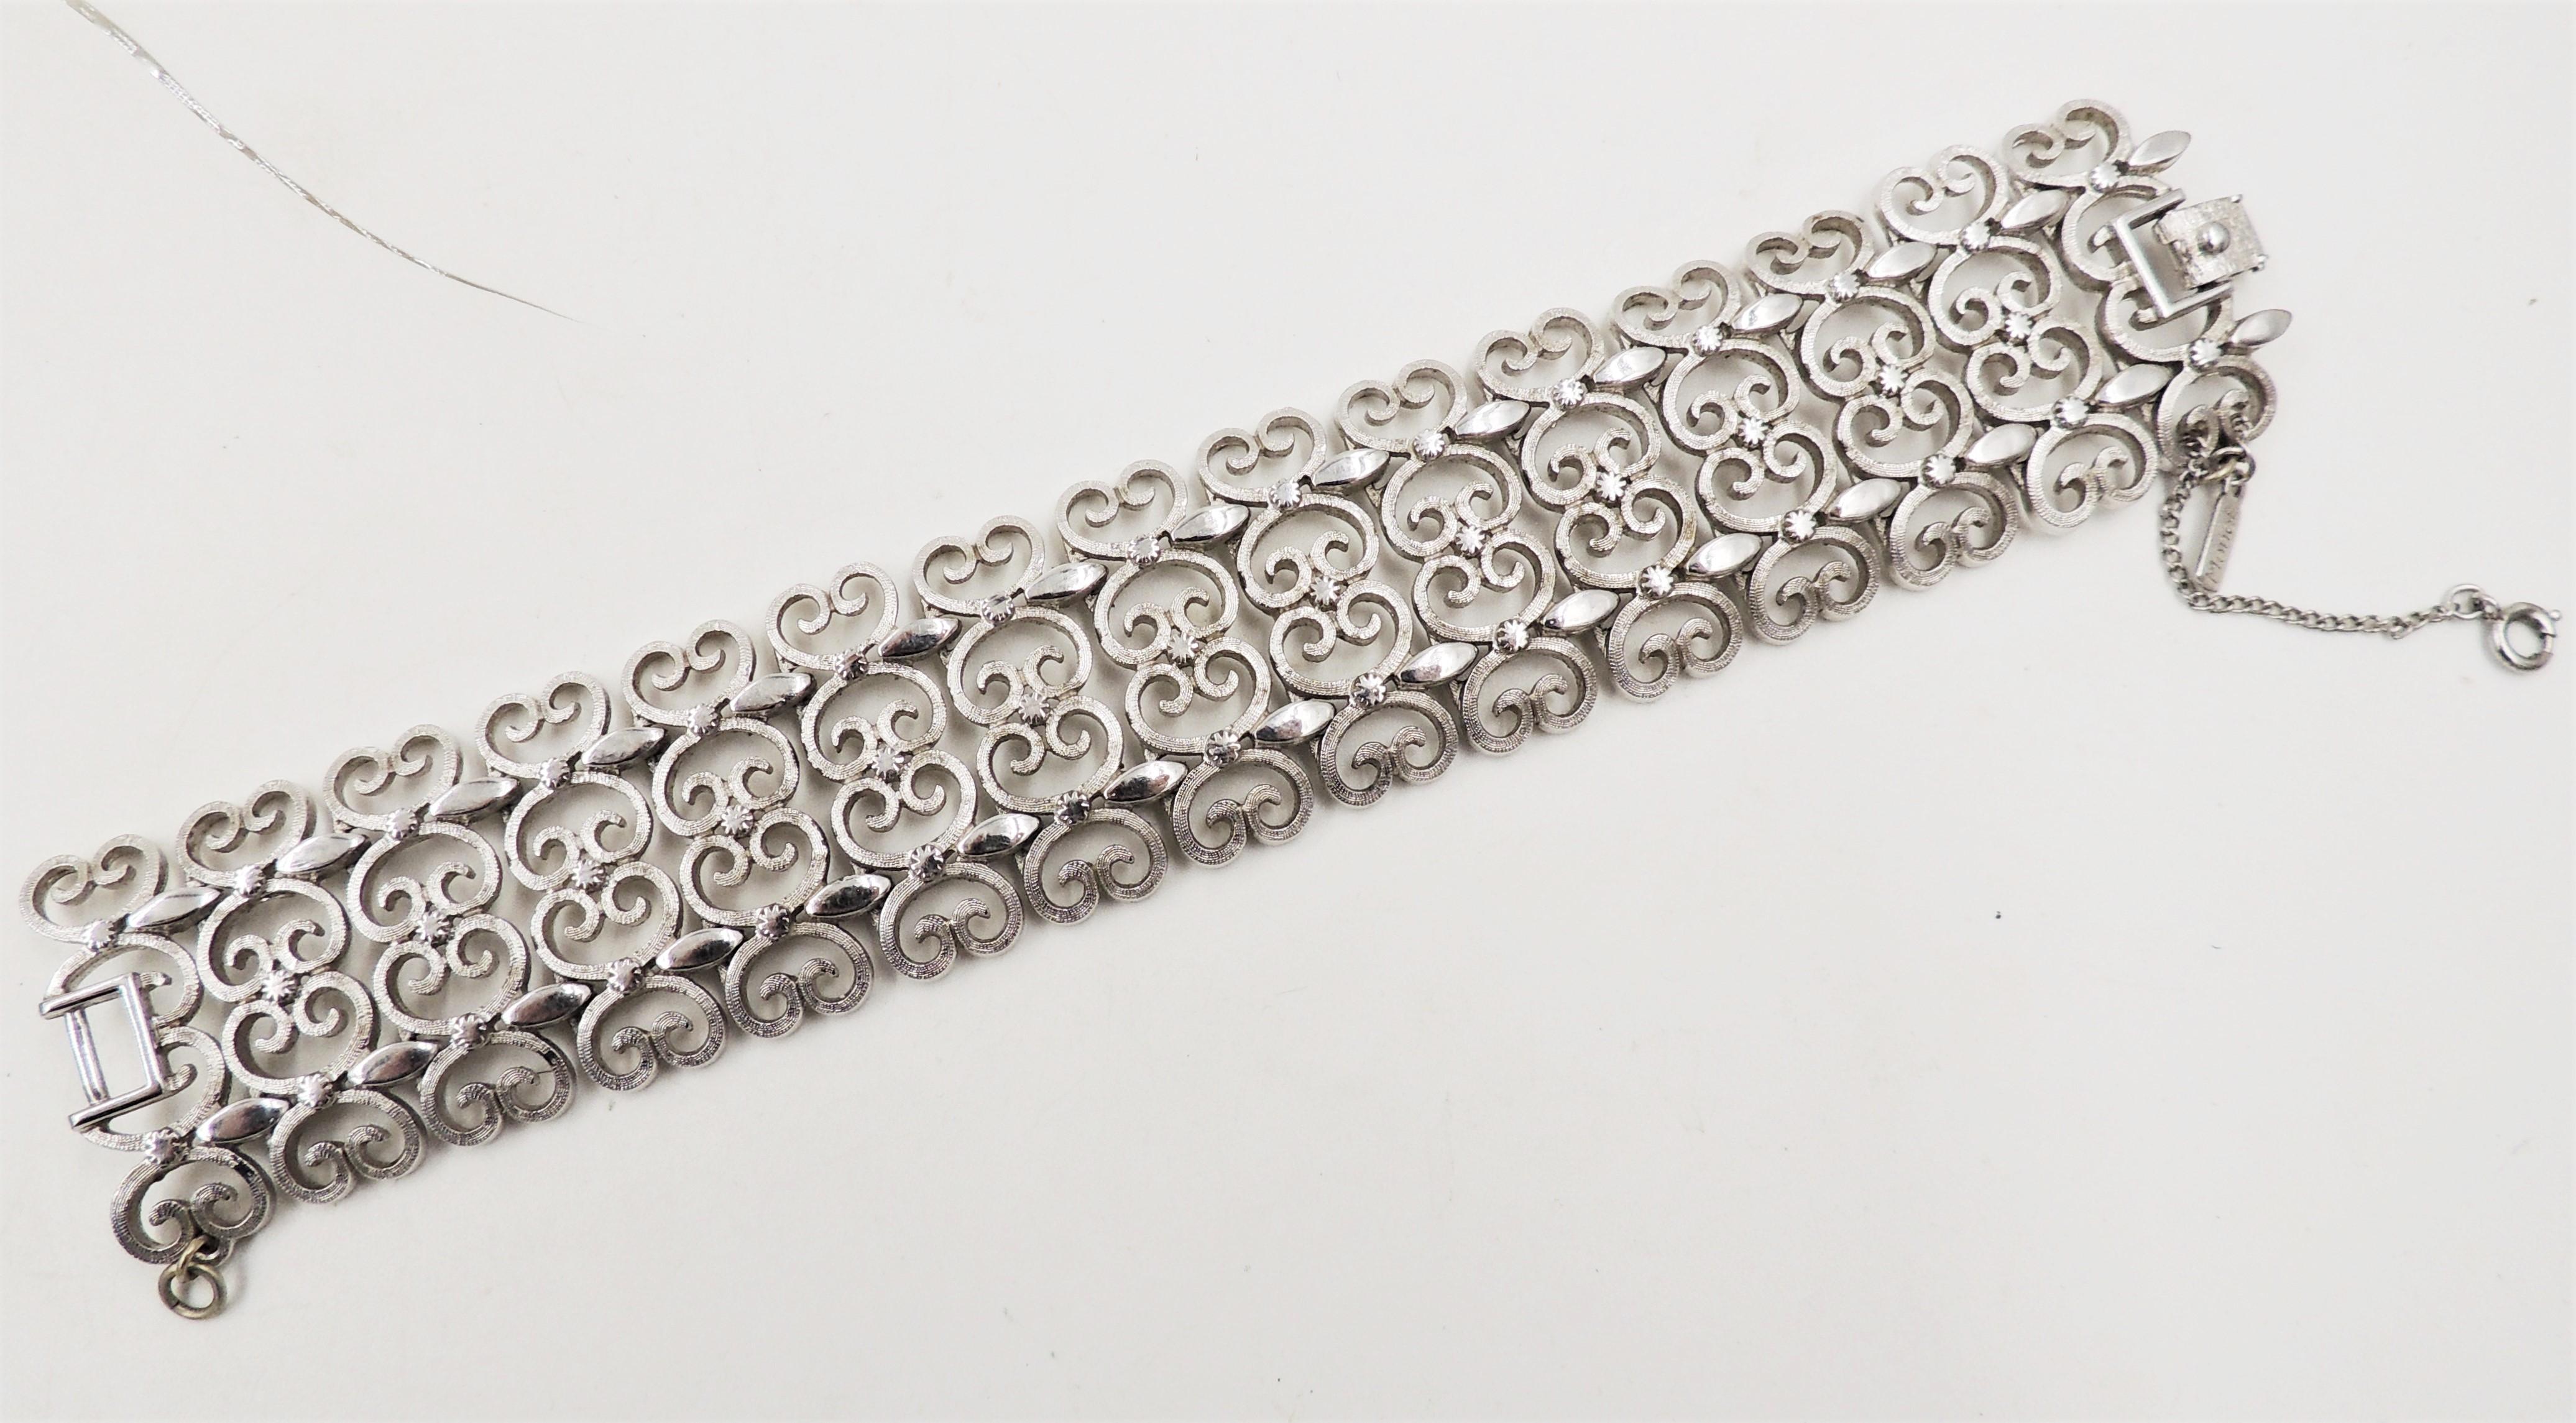 Rhodium plated filigree open work bracelet with fold over clasp and security chain. Marked 